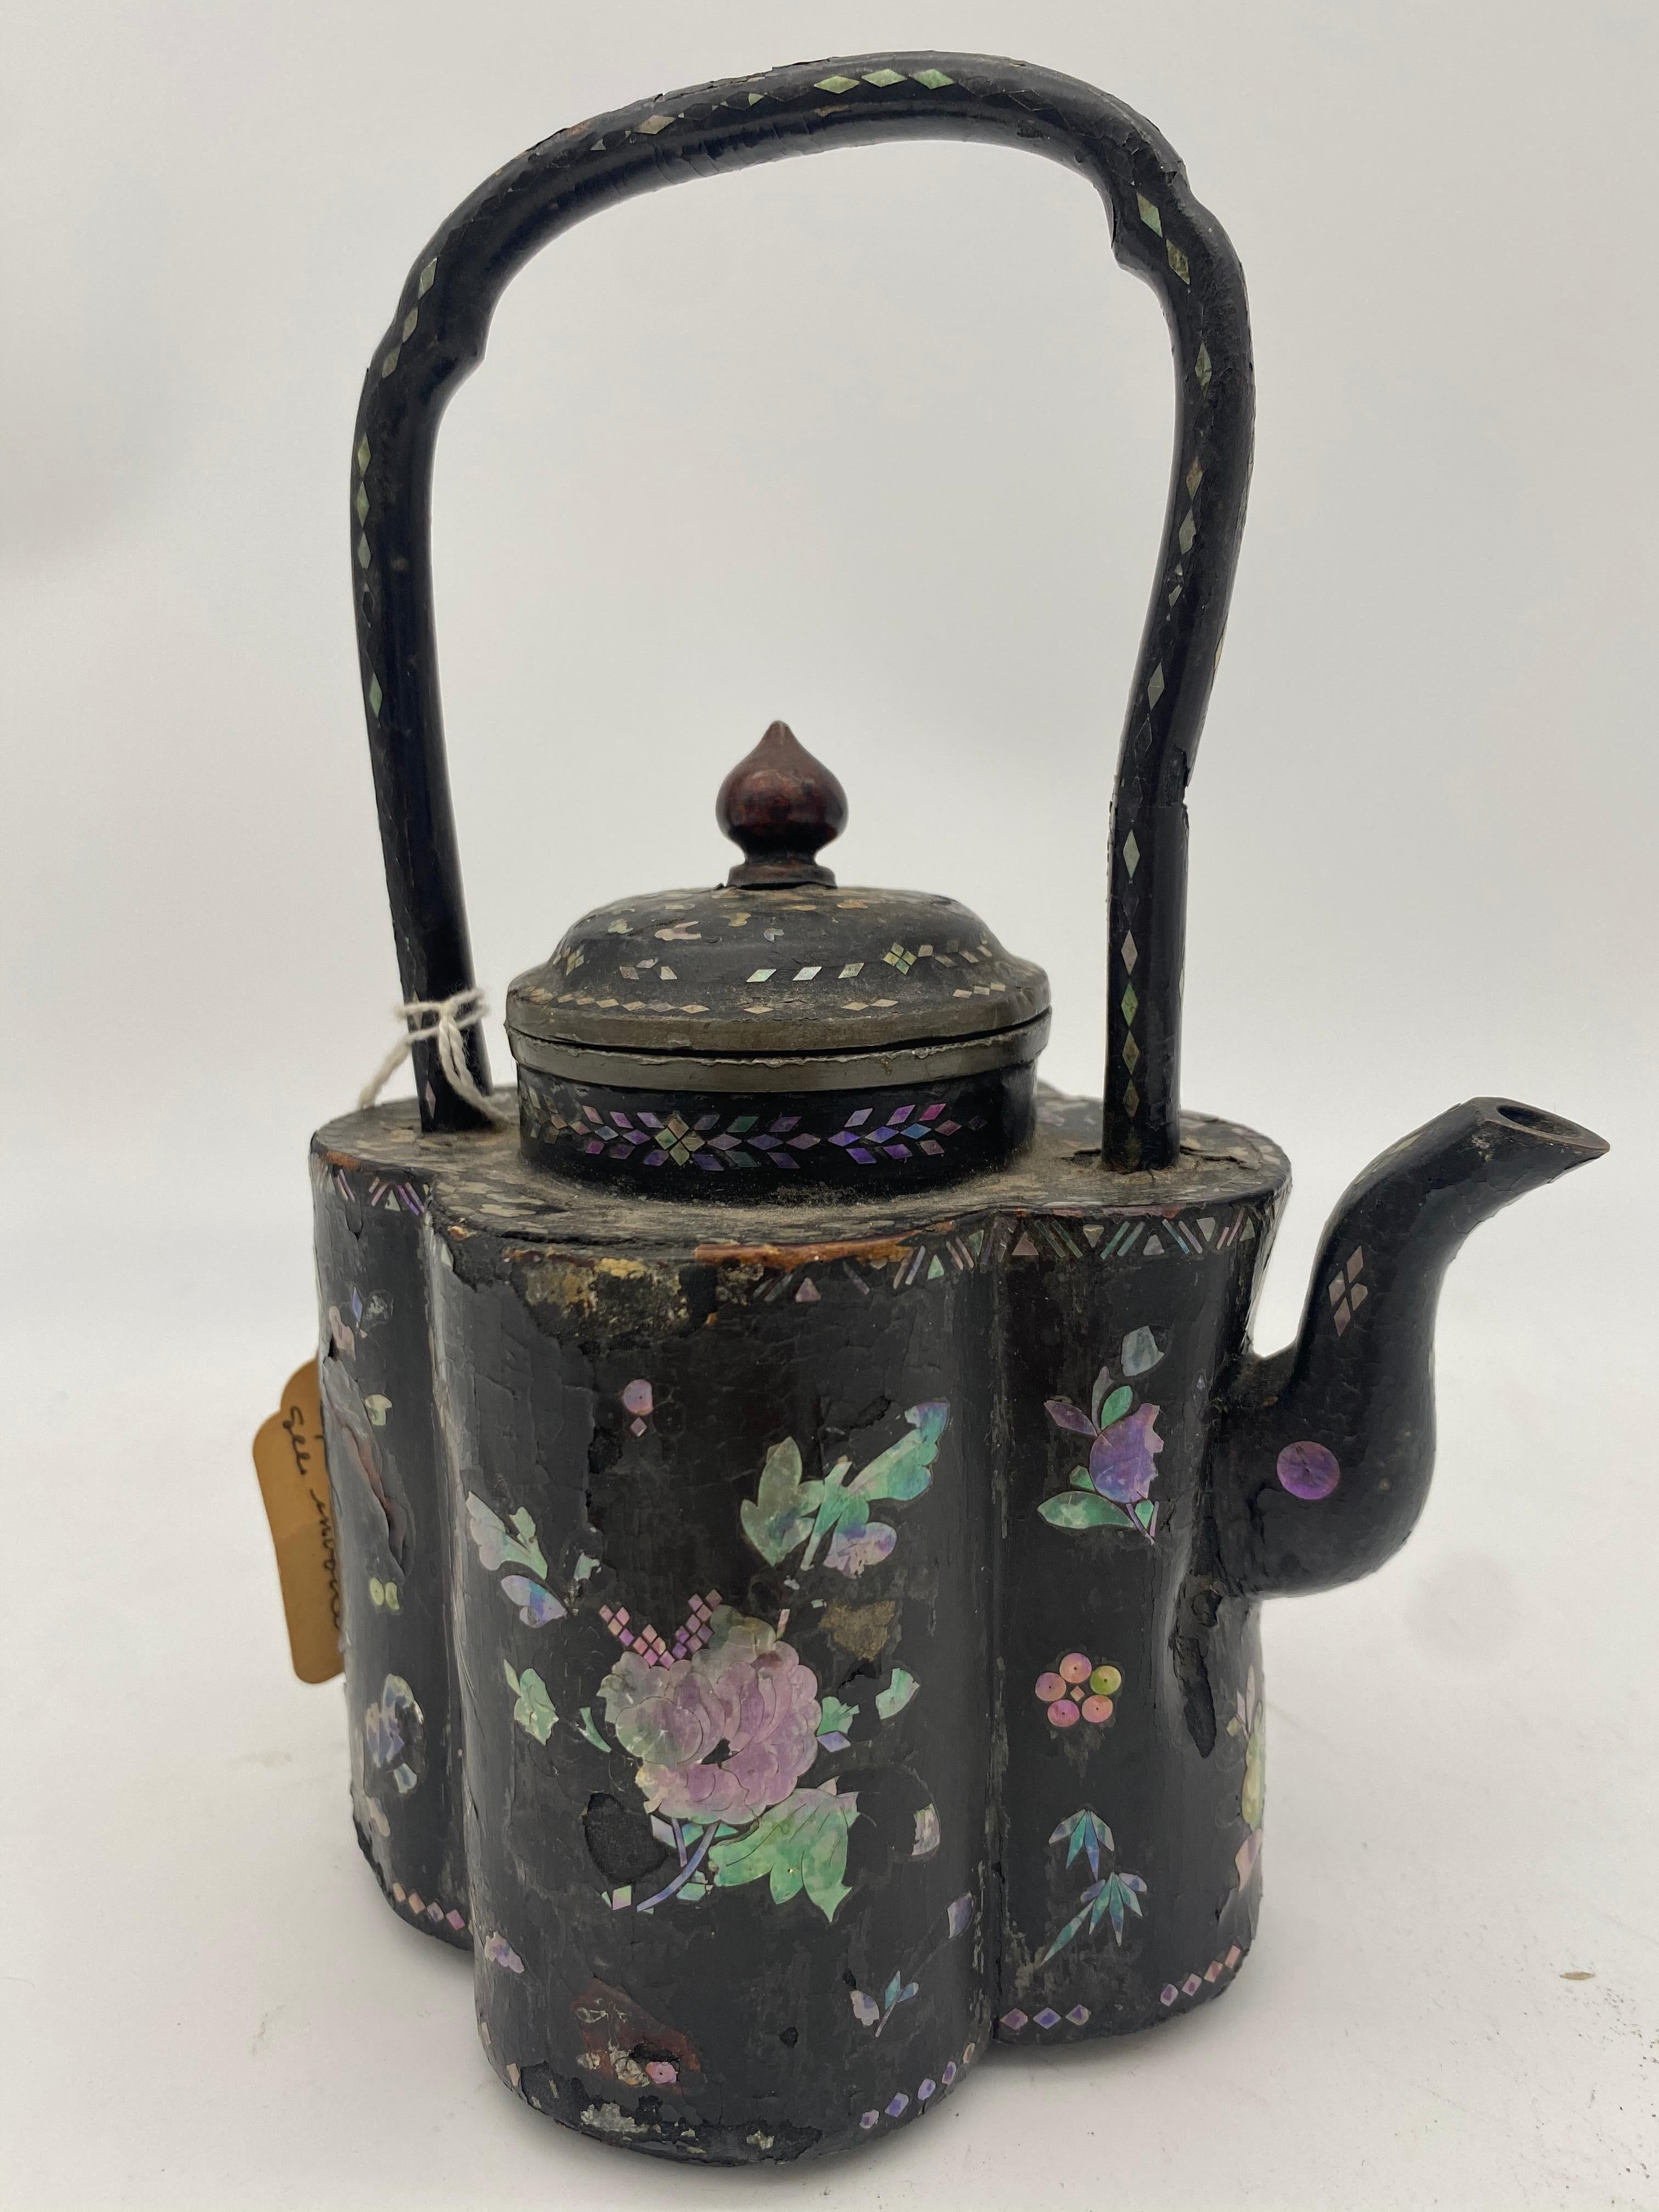 18th century Chinese lacquer mother of pearl inlay pewter teapot, height to handle top 8 inch, floral decoration as expected for age and use. Very beautiful and hard to find like this.